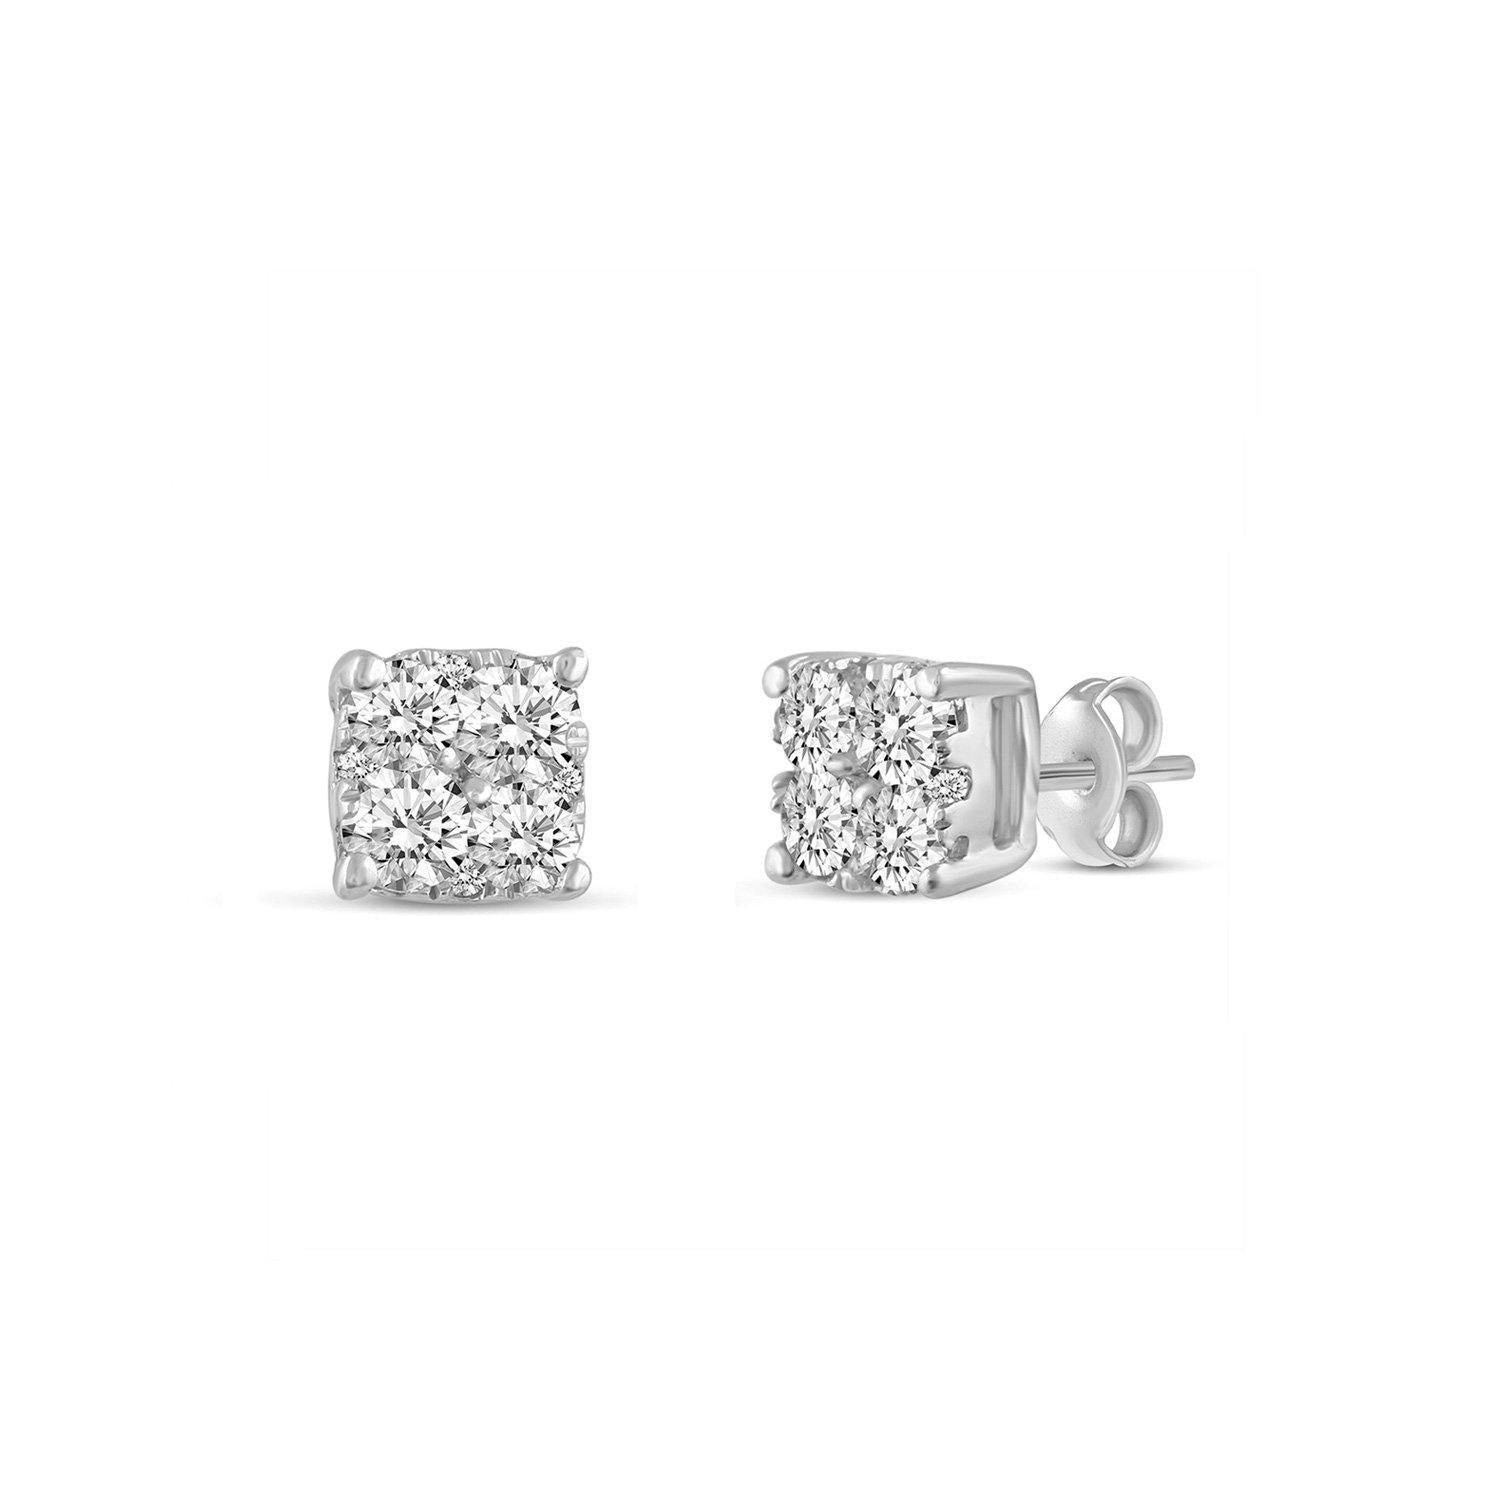 1/4 - 1 Cttw Diamond Round Grand Cluster Stud Earrings 1.0ct / 14K White Gold / I2 (It Will Take 2 ~3 Weeks to Be delivered)